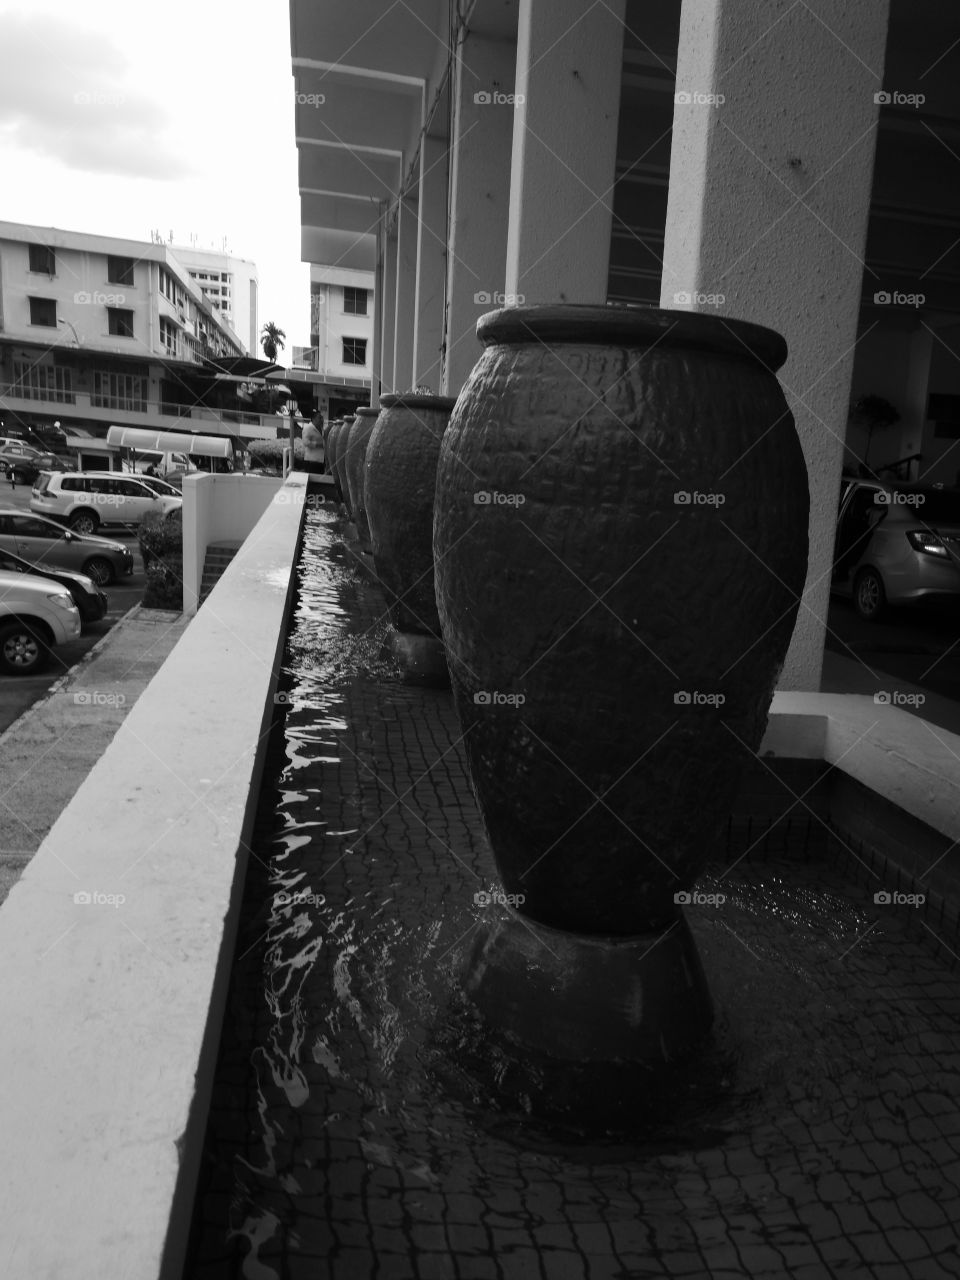 Row of water fountain pots in mono